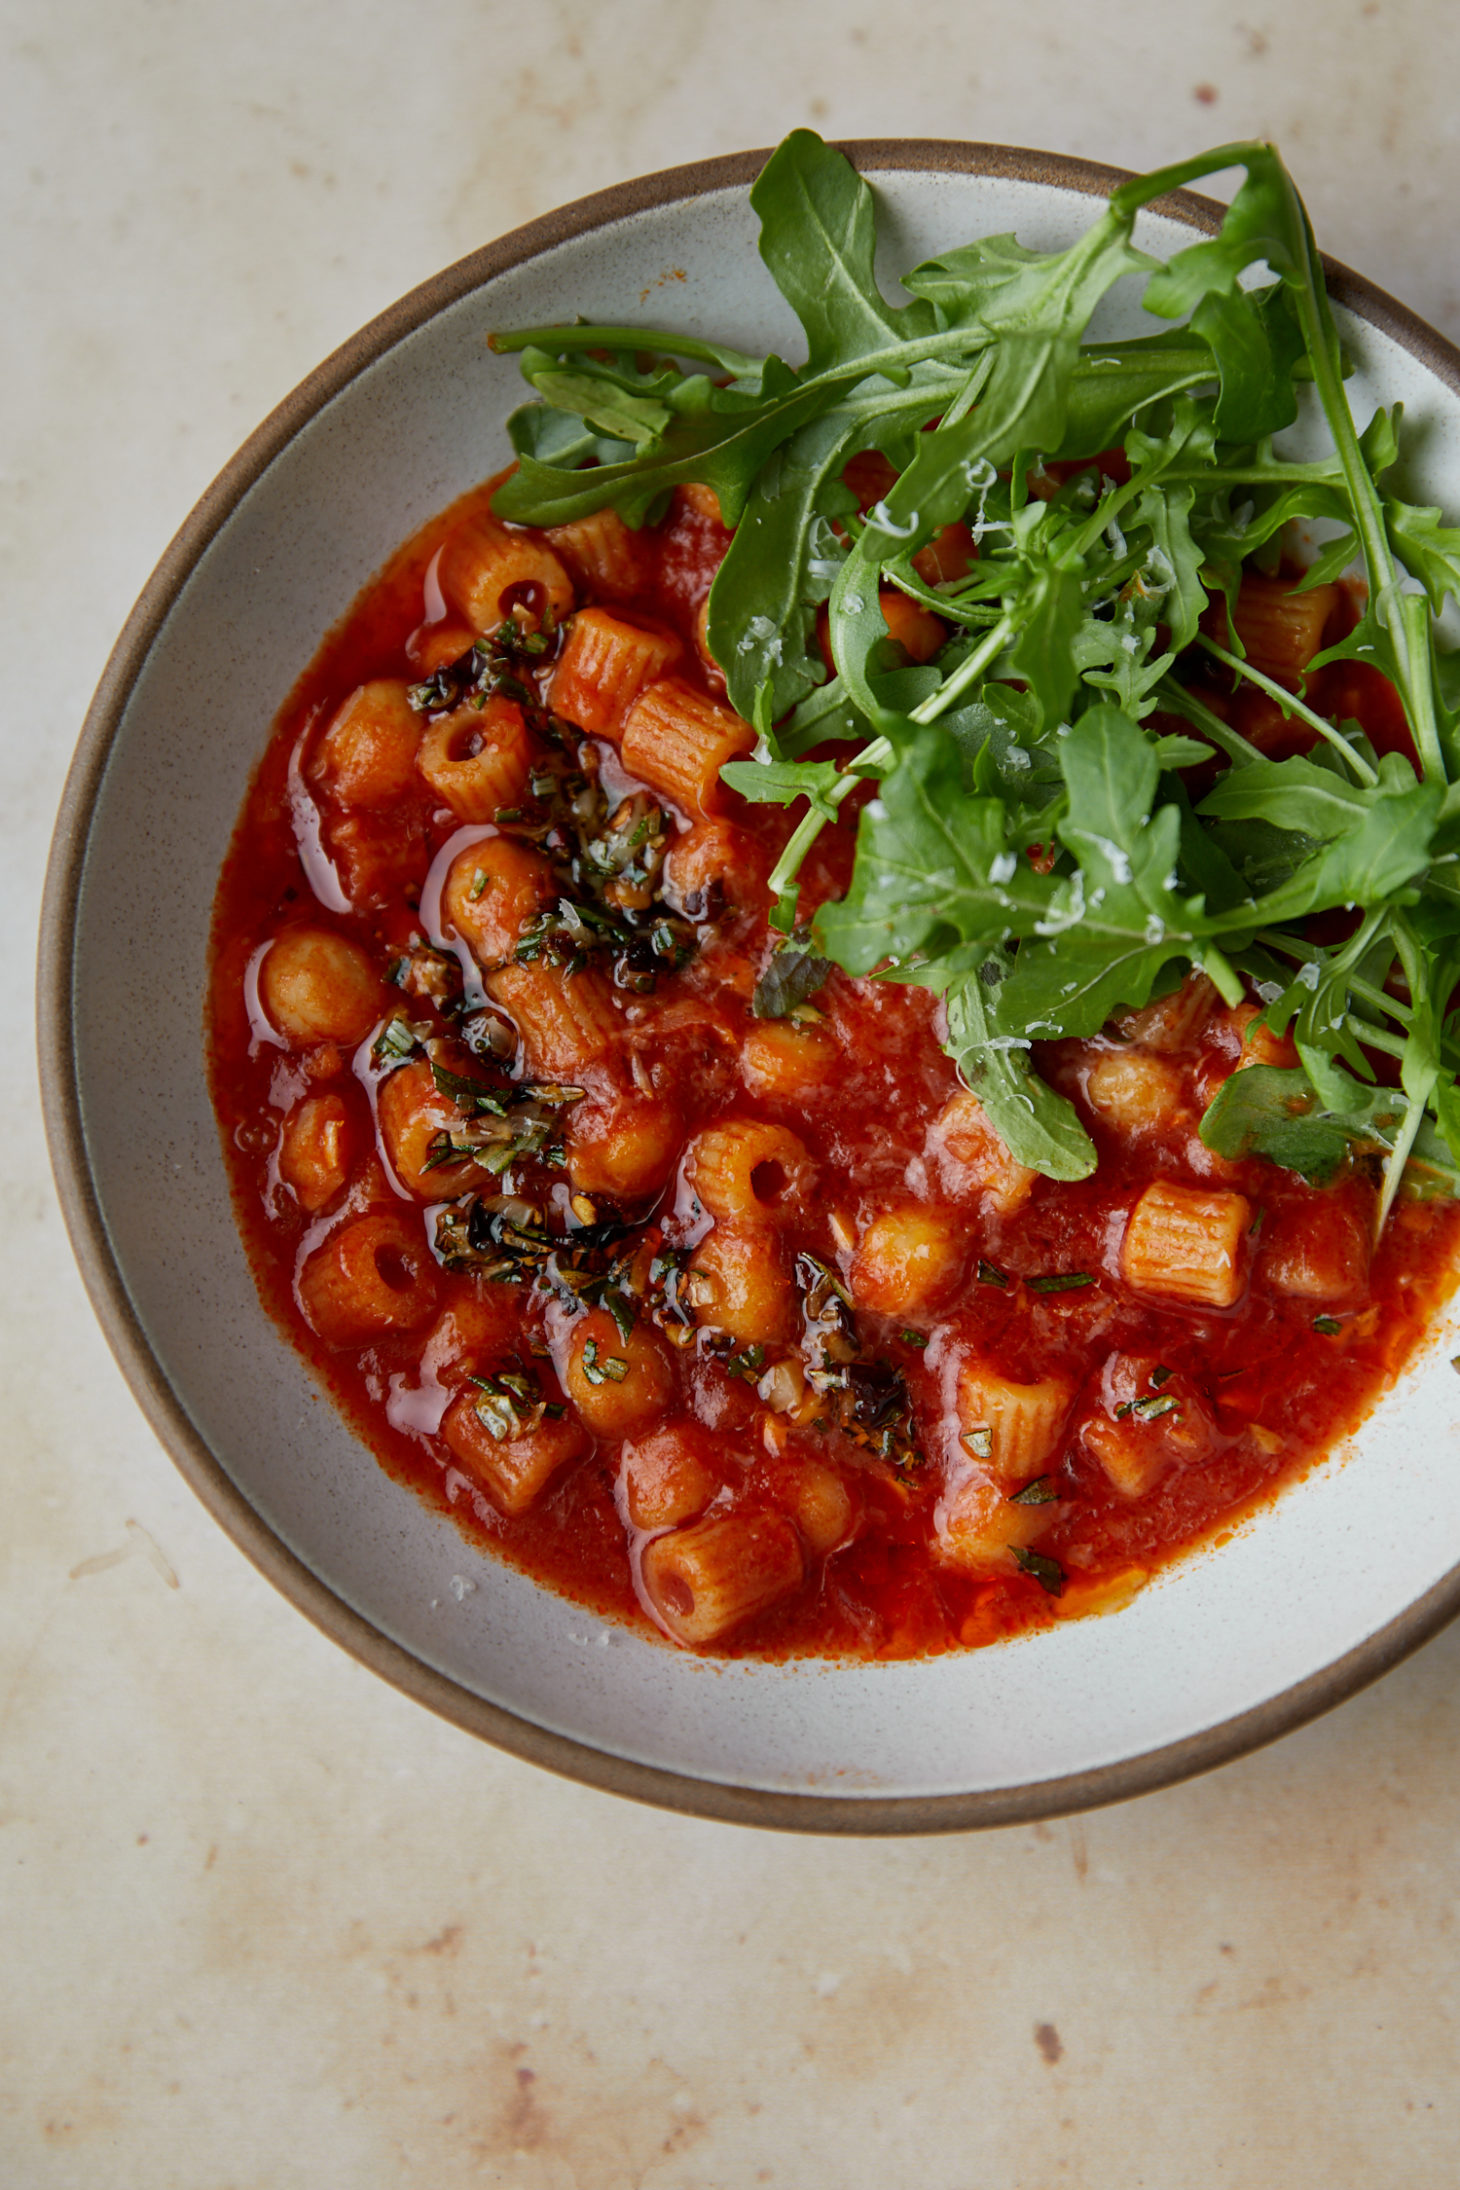 Close-up photo of a greyish bowl filled with pasta, chickpea, and tomato soup with arugula on top.